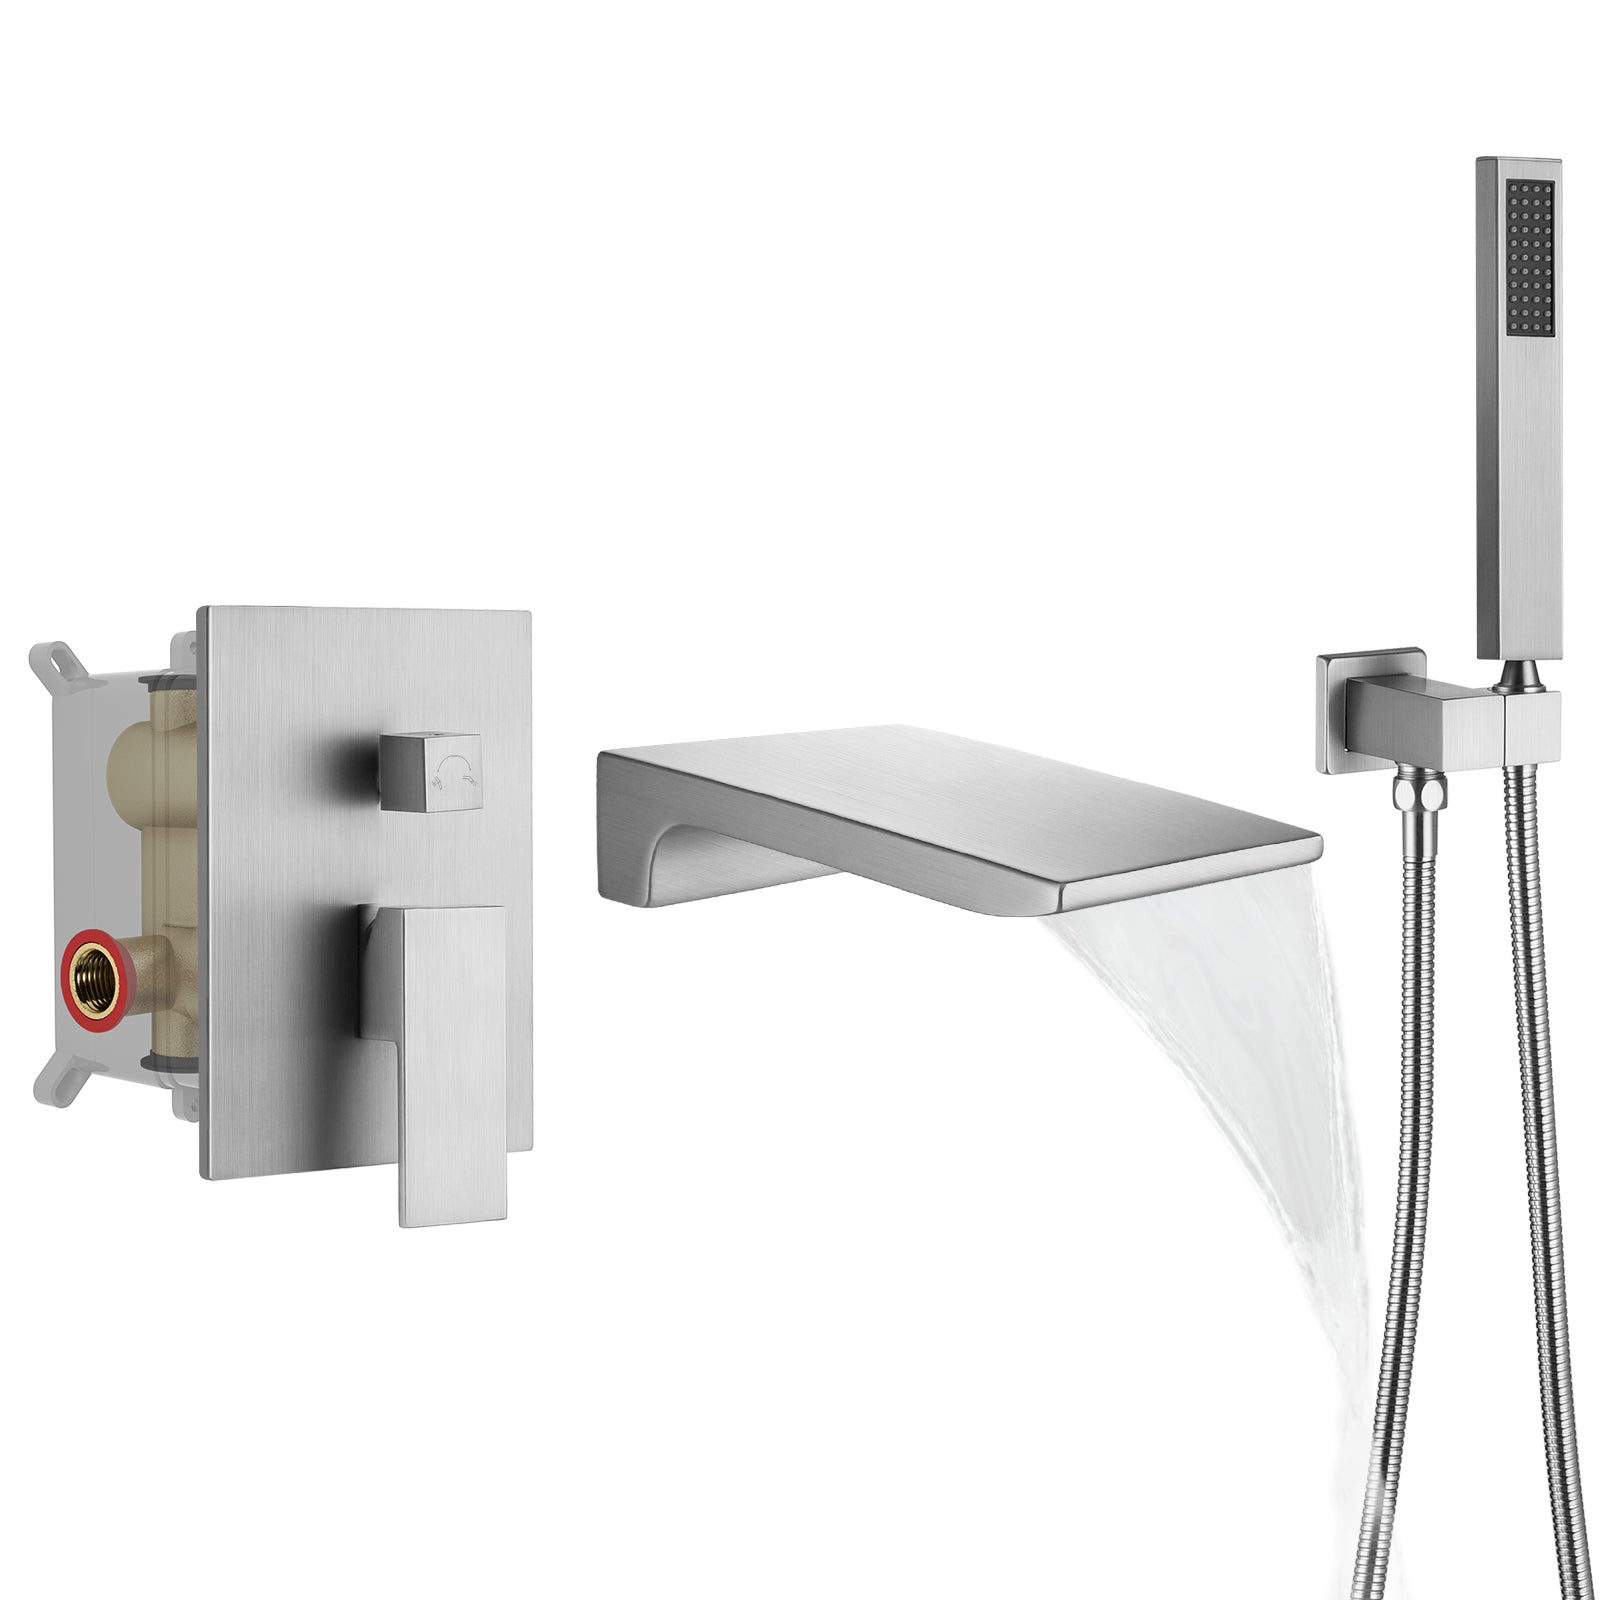 M6502NI-BL EVERSTEIN Waterfall Bathtub Faucet Set with Handheld Shower Head and Tub Spout, Wall Mounted Tub Faucet Trim Kit with Pressure Balanced Valve, Brushed Nickel